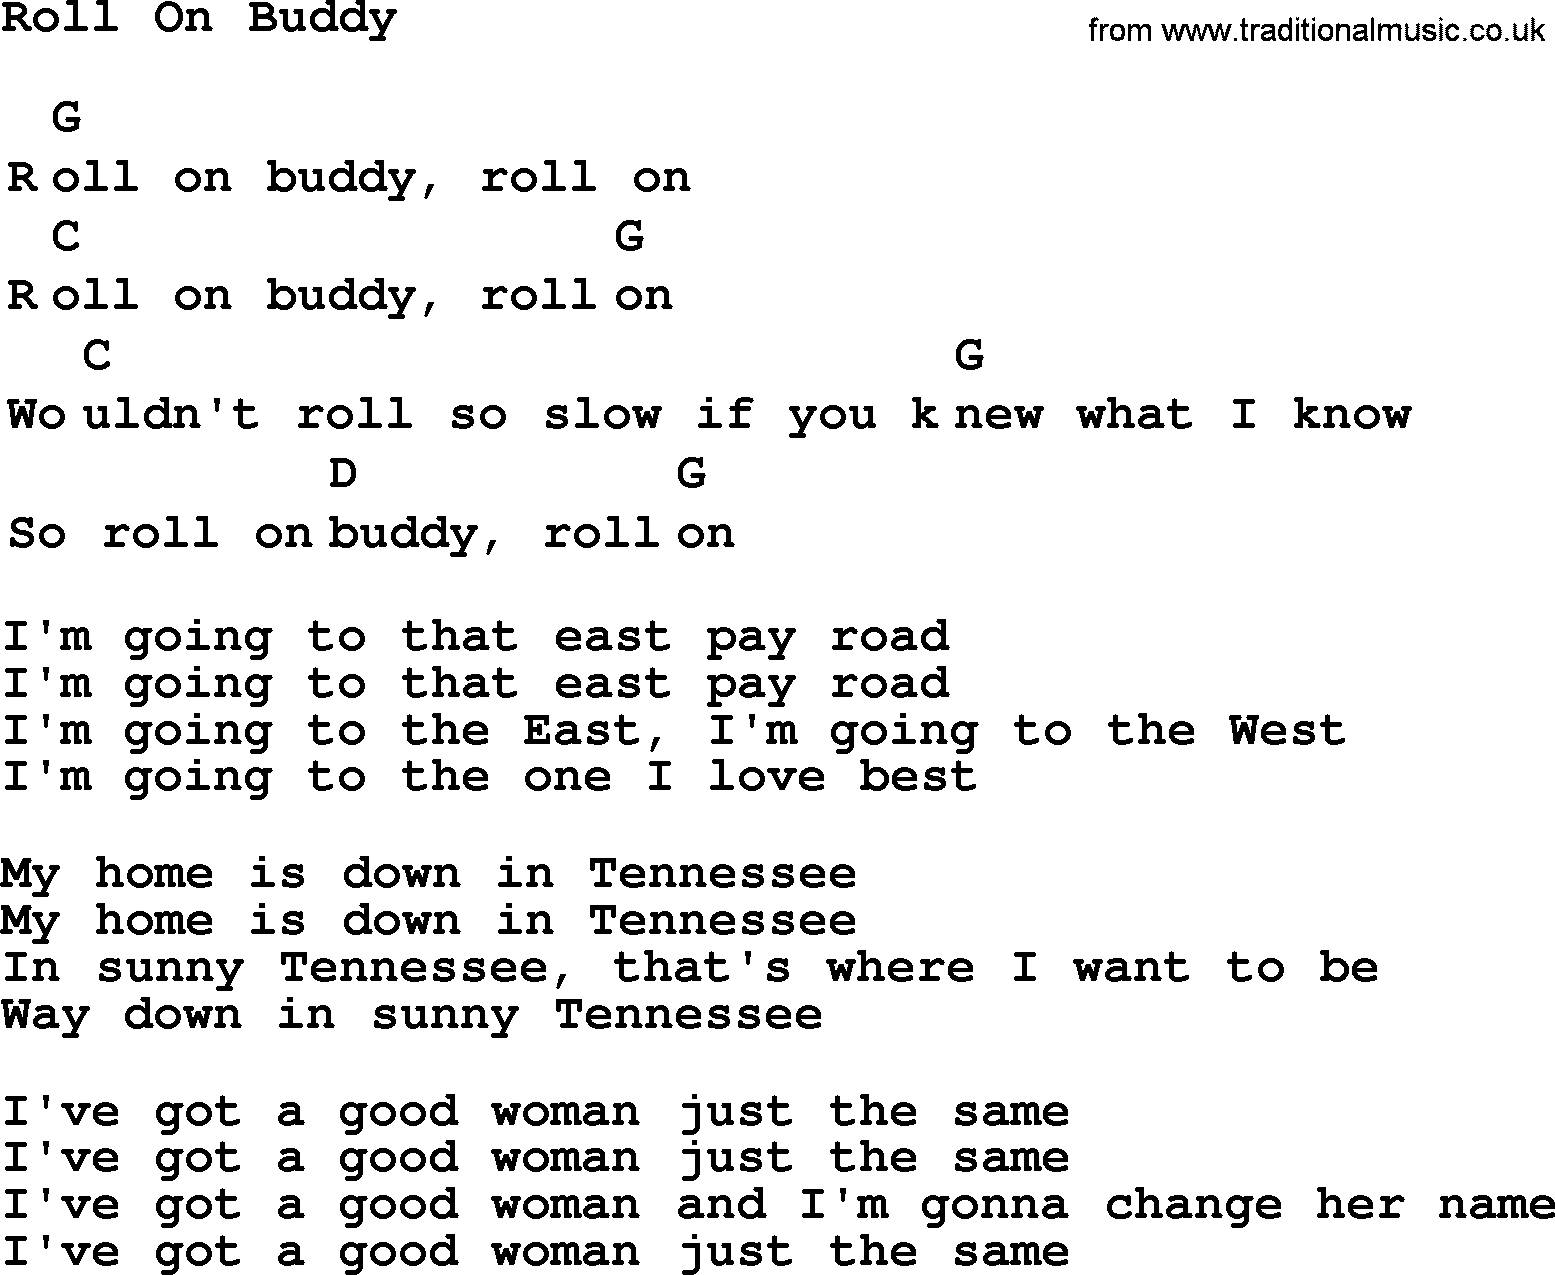 Top 1000 Most Popular Folk and Old-time Songs: Roll On Buddy, lyrics and chords